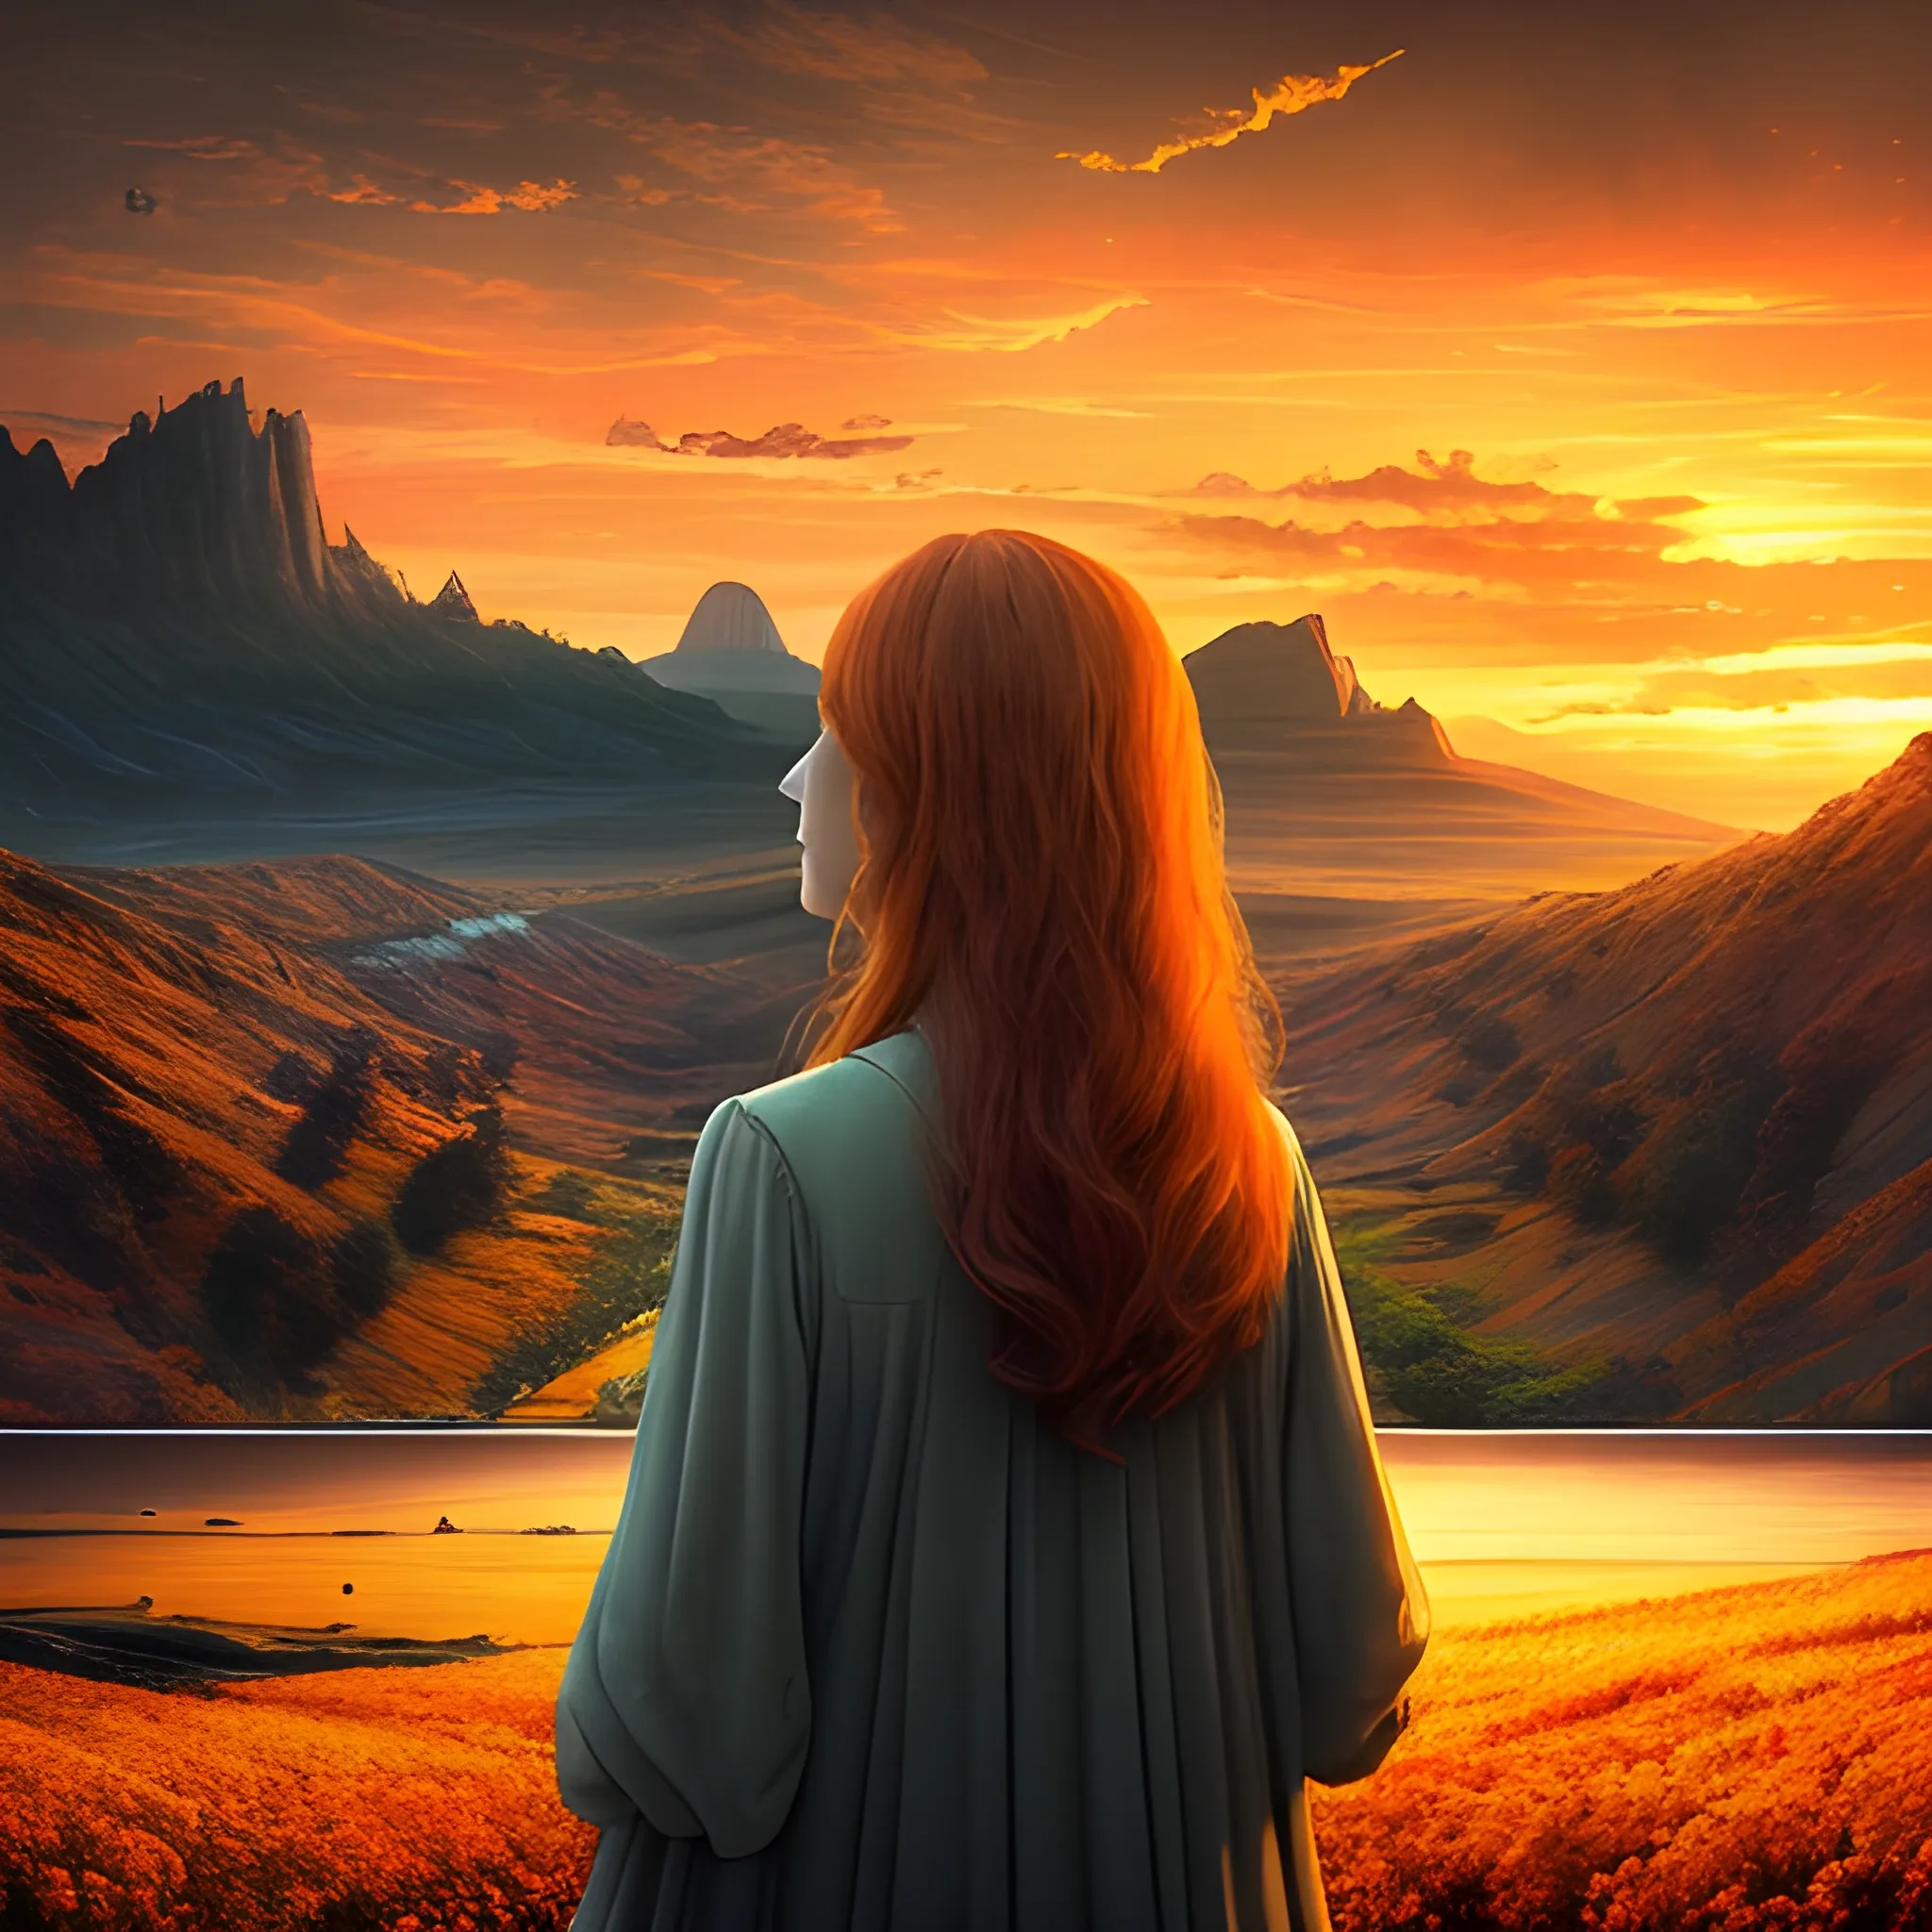 a beautiful landscape photo inspired by arcadia, cinematic atmospheric masterpiece, award winning, hyperdetailed, fantastic with warm tones of oranges and yellows in the sky to convey a sunset or sunrise. wonderful with a mid-aged modern looking woman with mid-long hair looking at this scenary knowing that the future is in her hands.